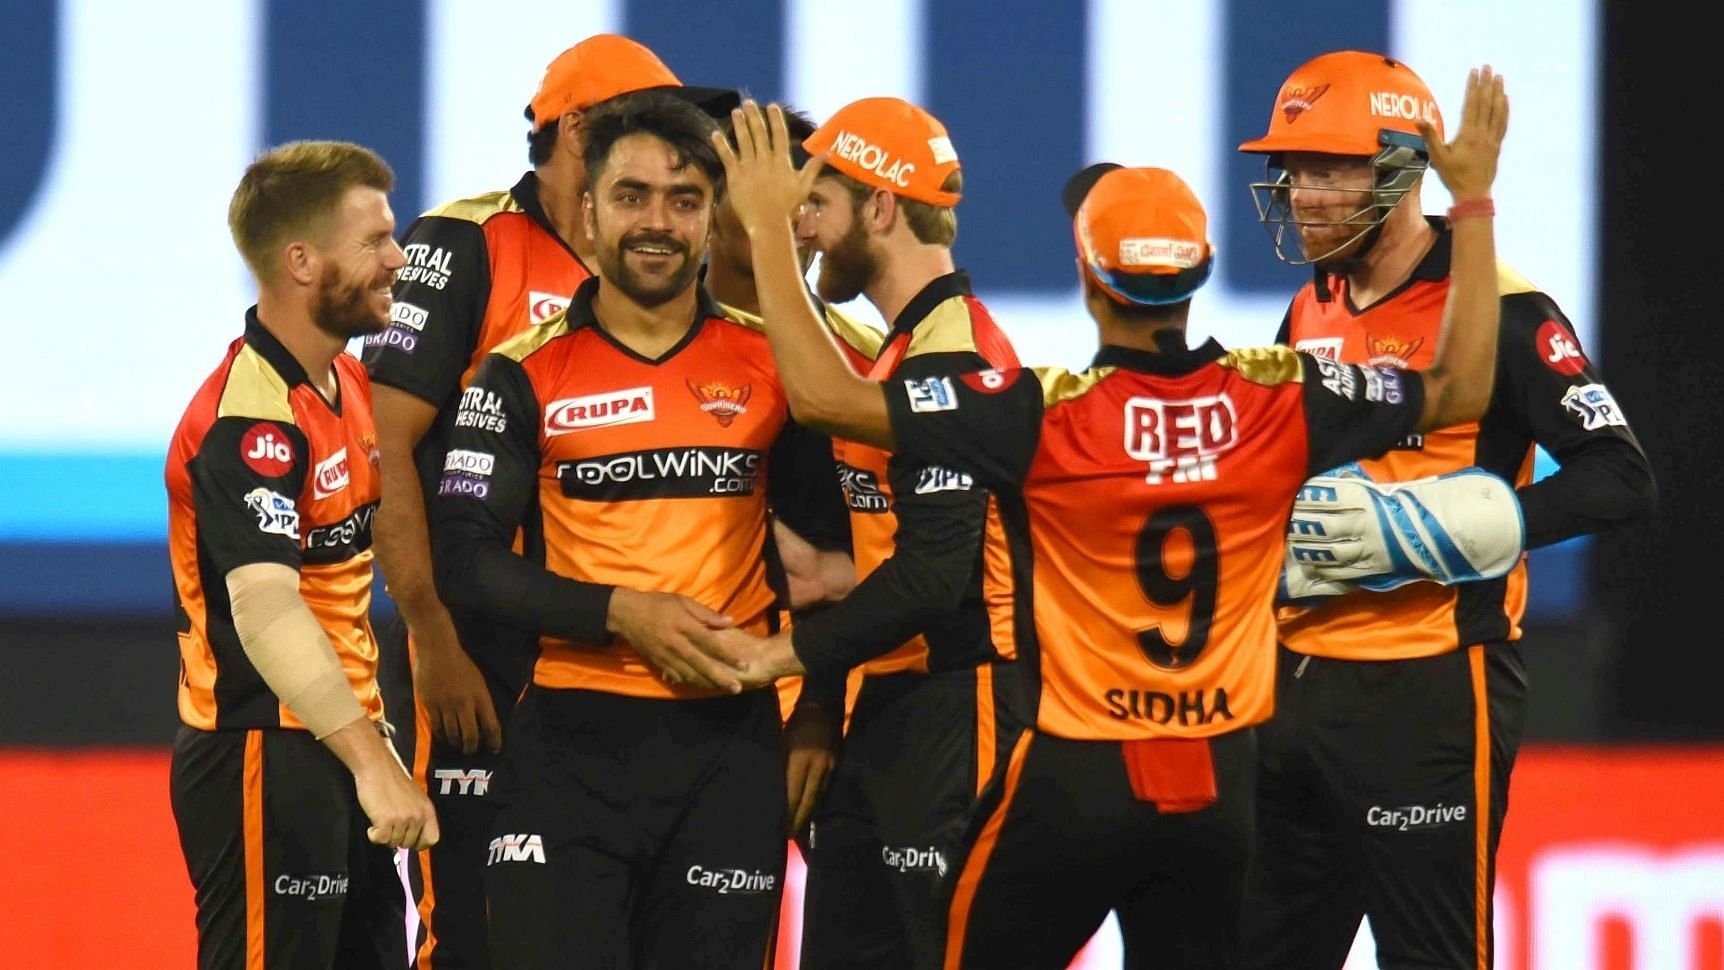 Sunrisers Hyderabad (SRH) beat Rajasthan Royals (RR) by 5 wickets in a thrilling Indian Premier League (IPL) contest.